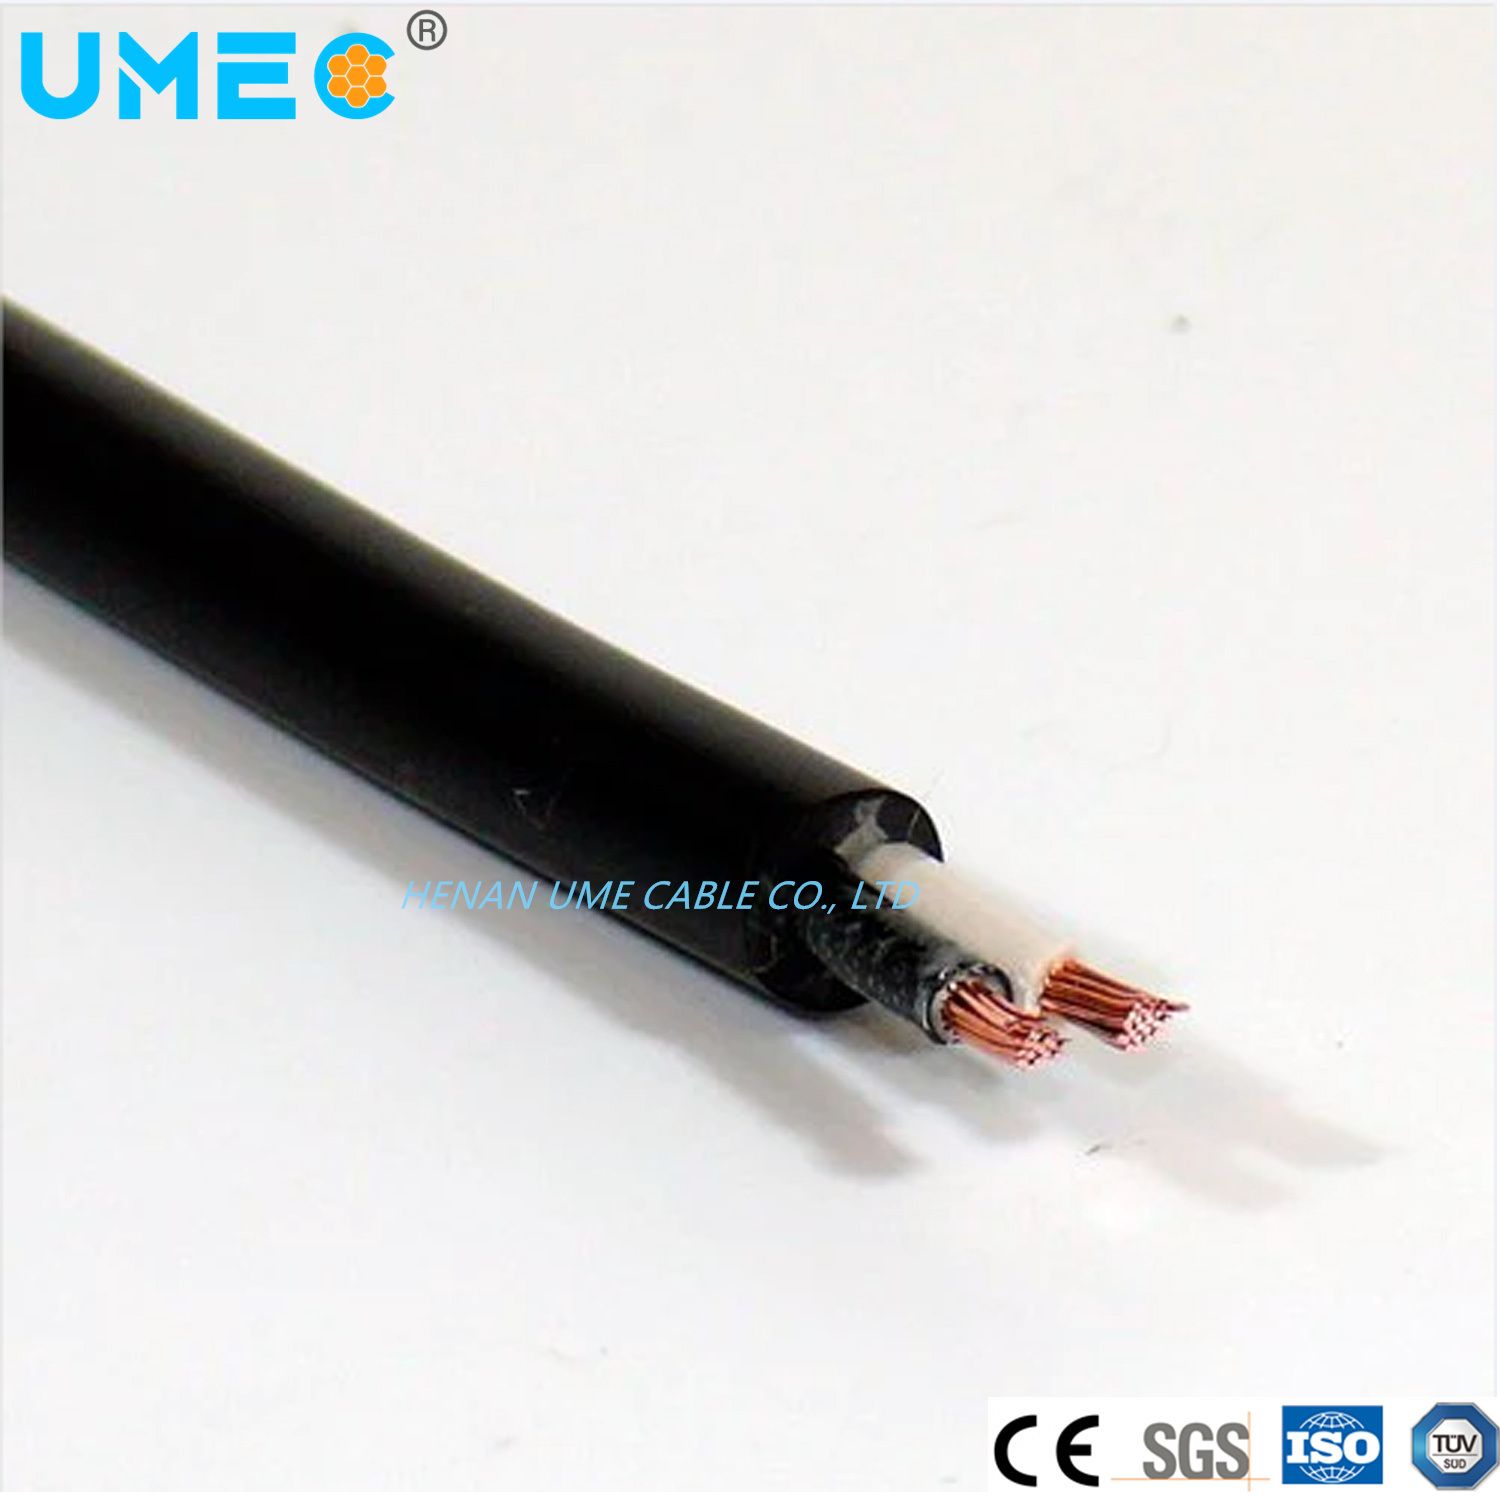 Tsj Tjs-N Cable IEC ASTM Standard Approved PVC Insulated Nylon Sheathed 2X8AWG 3X8AWG 4X8AWG Electrical Wire and Cables